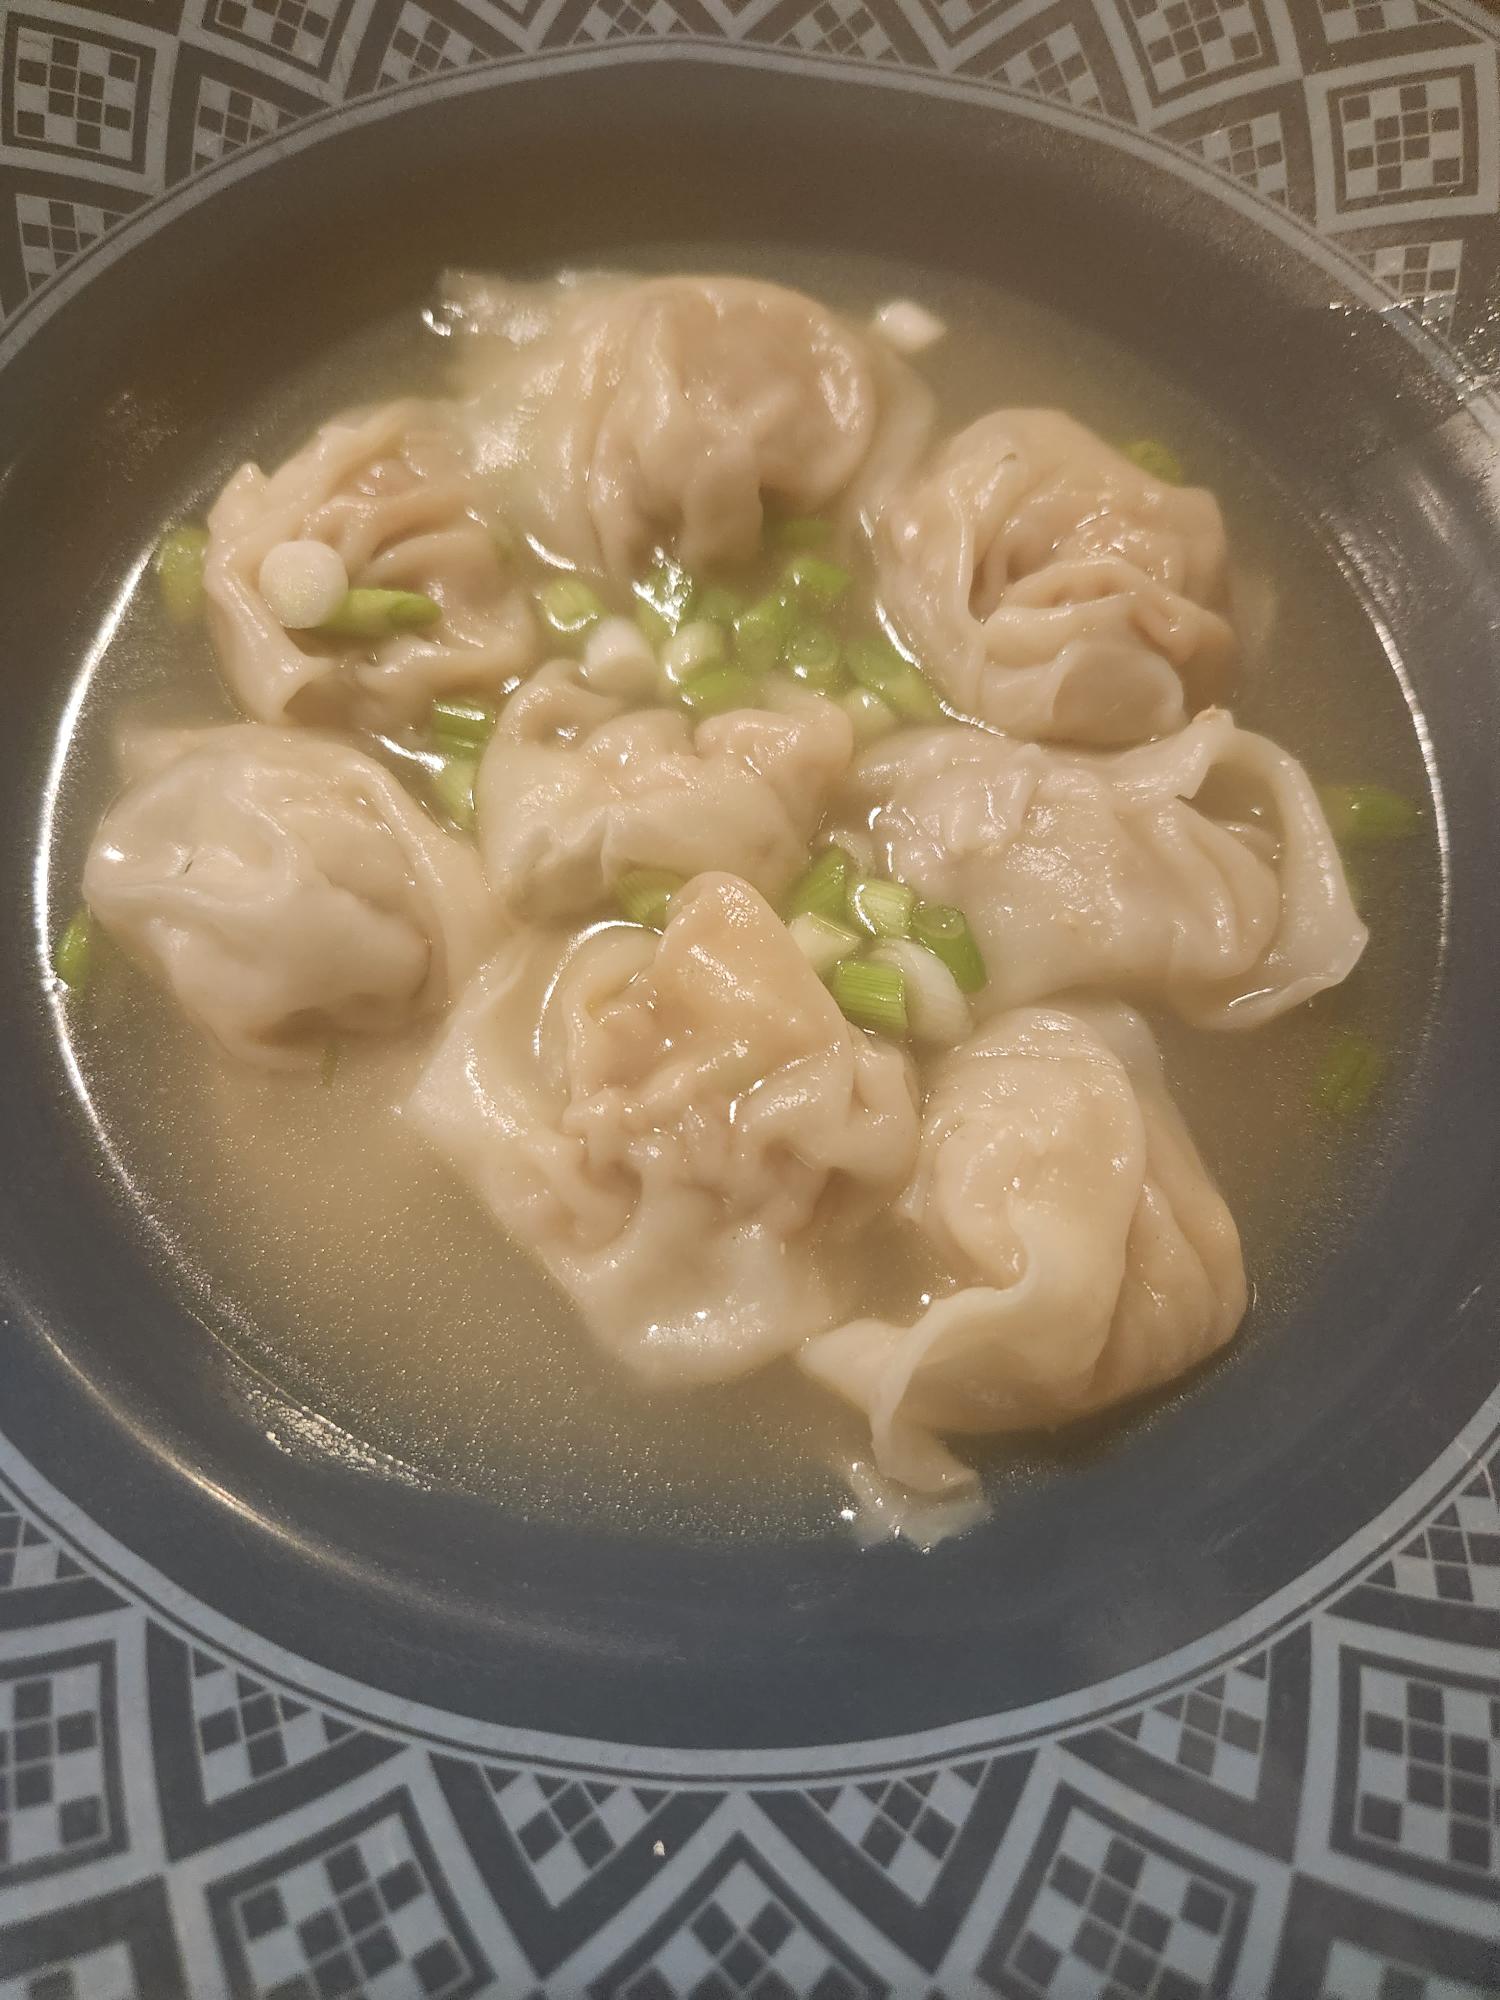 Featured image for “Pork Wonton Soup”